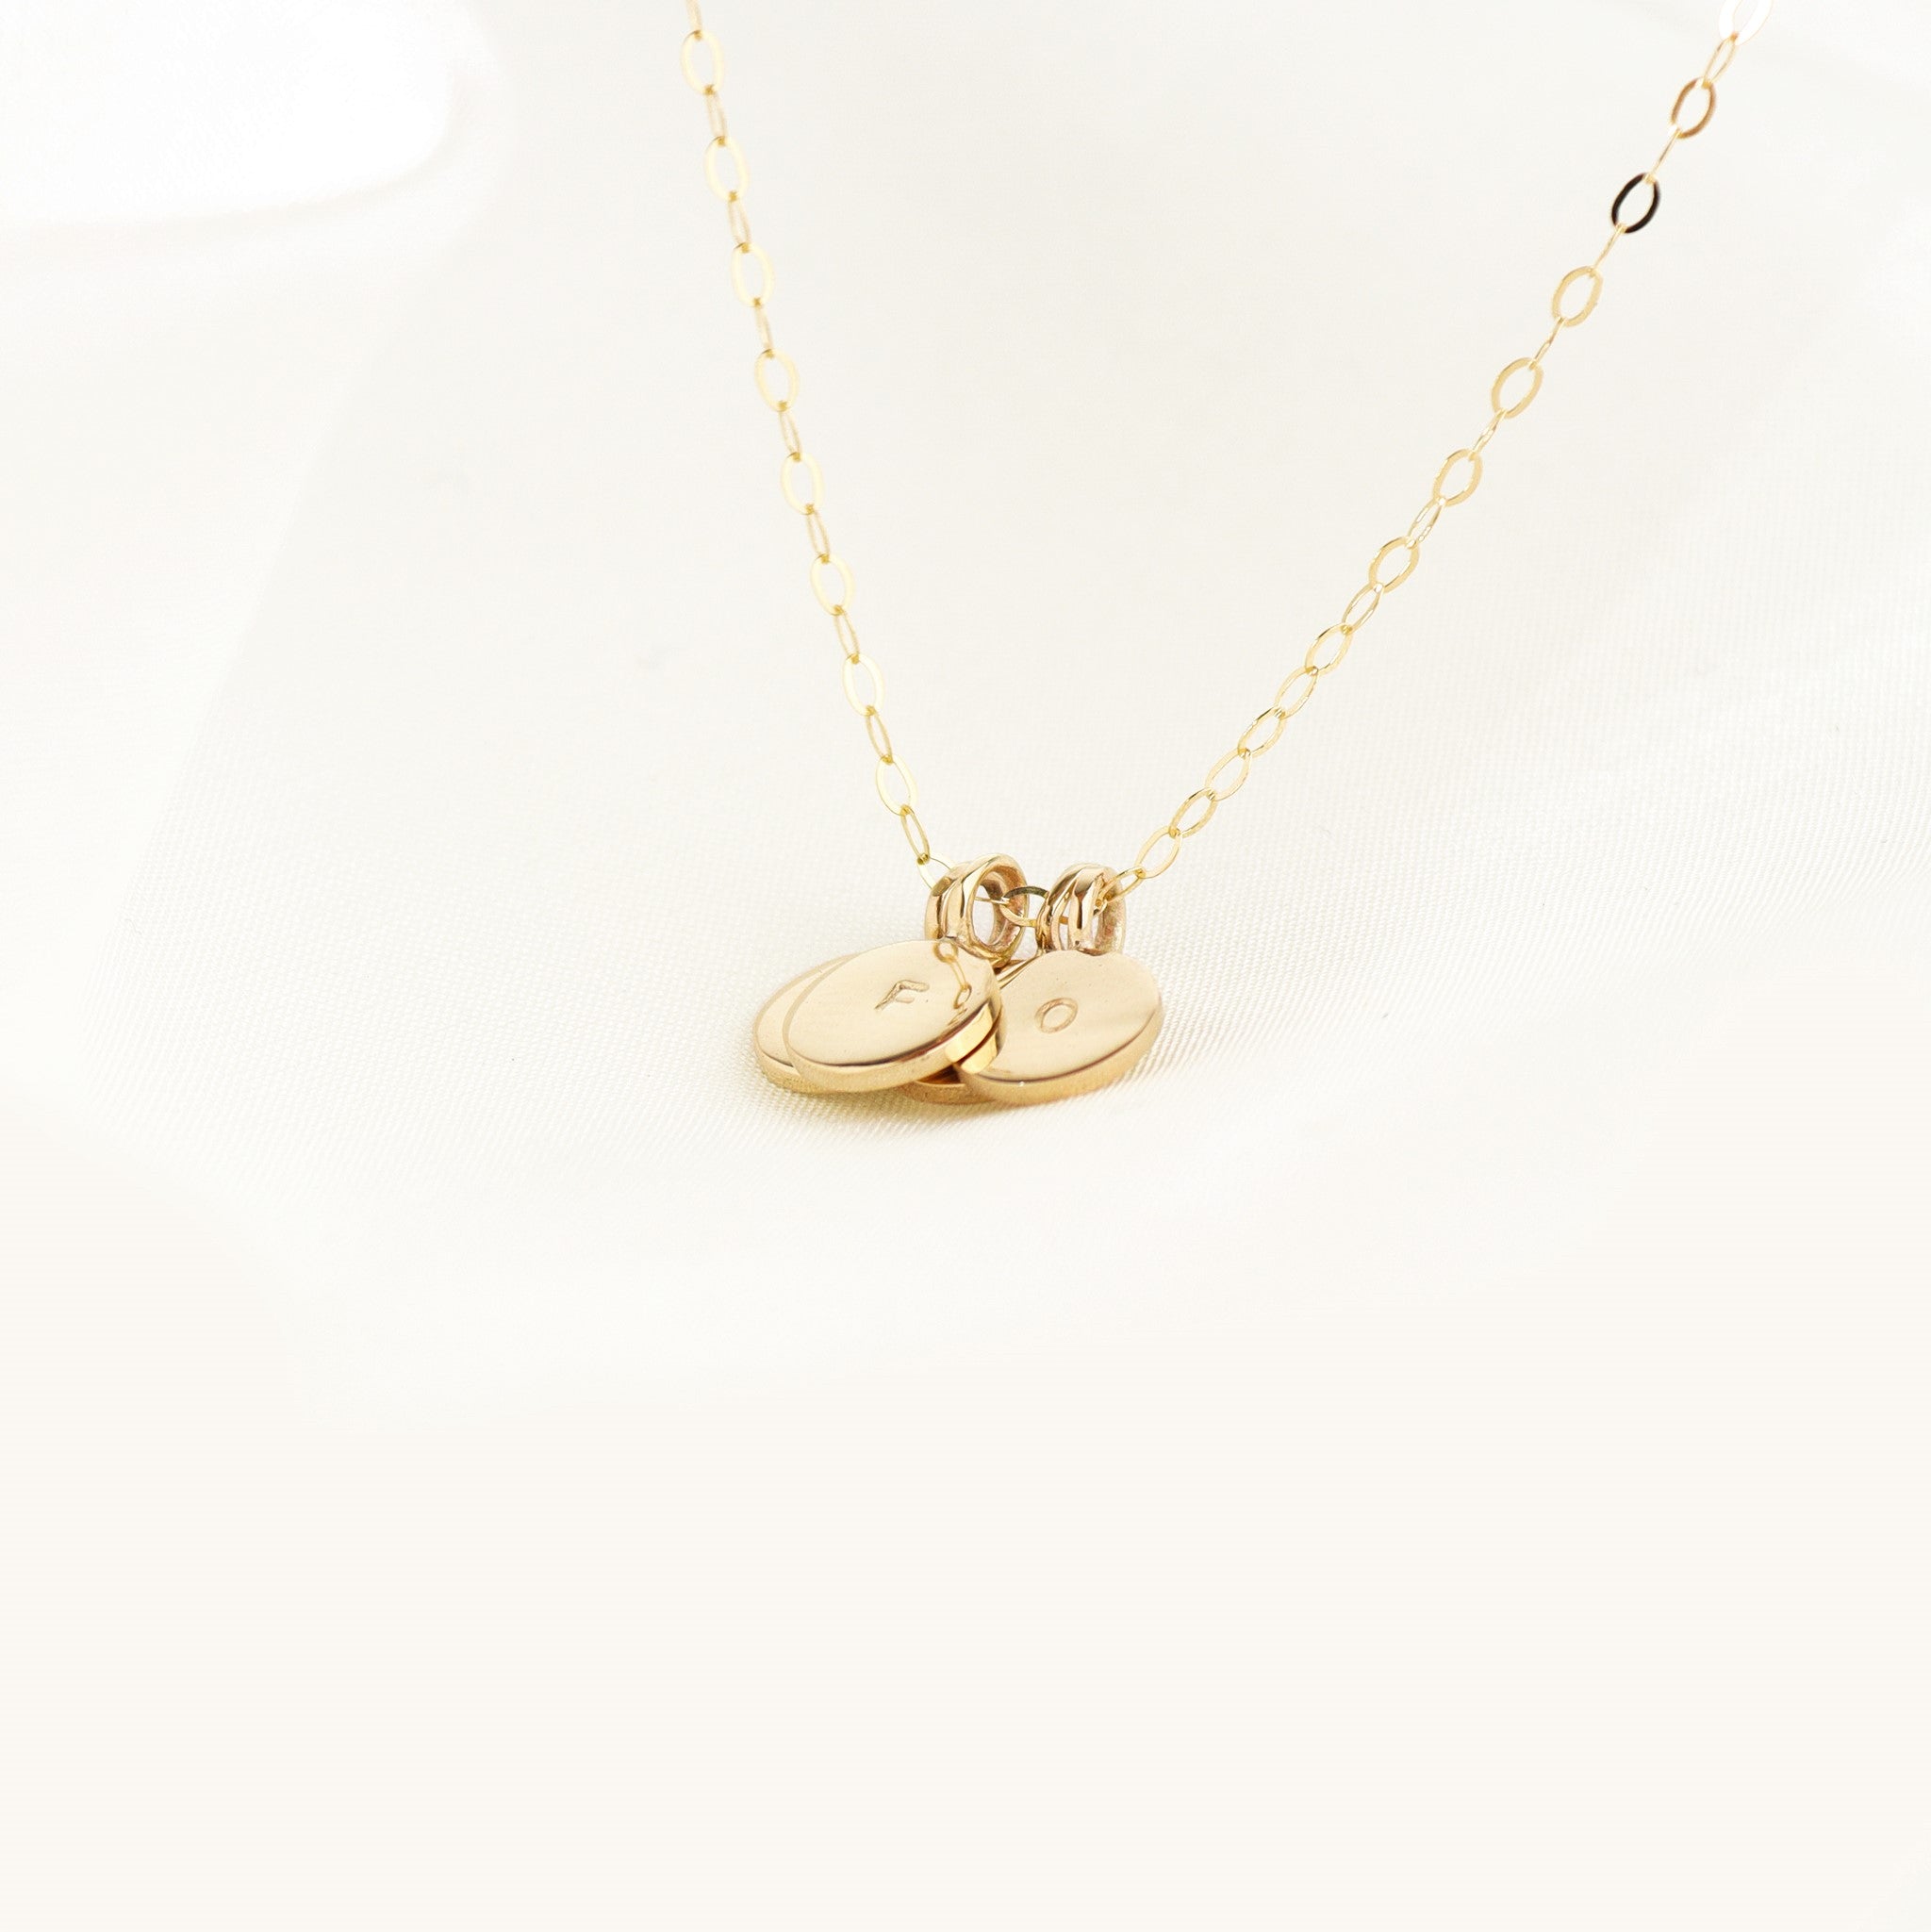 Solid Gold Personalised Initial Necklace - Lavey London Jewellery